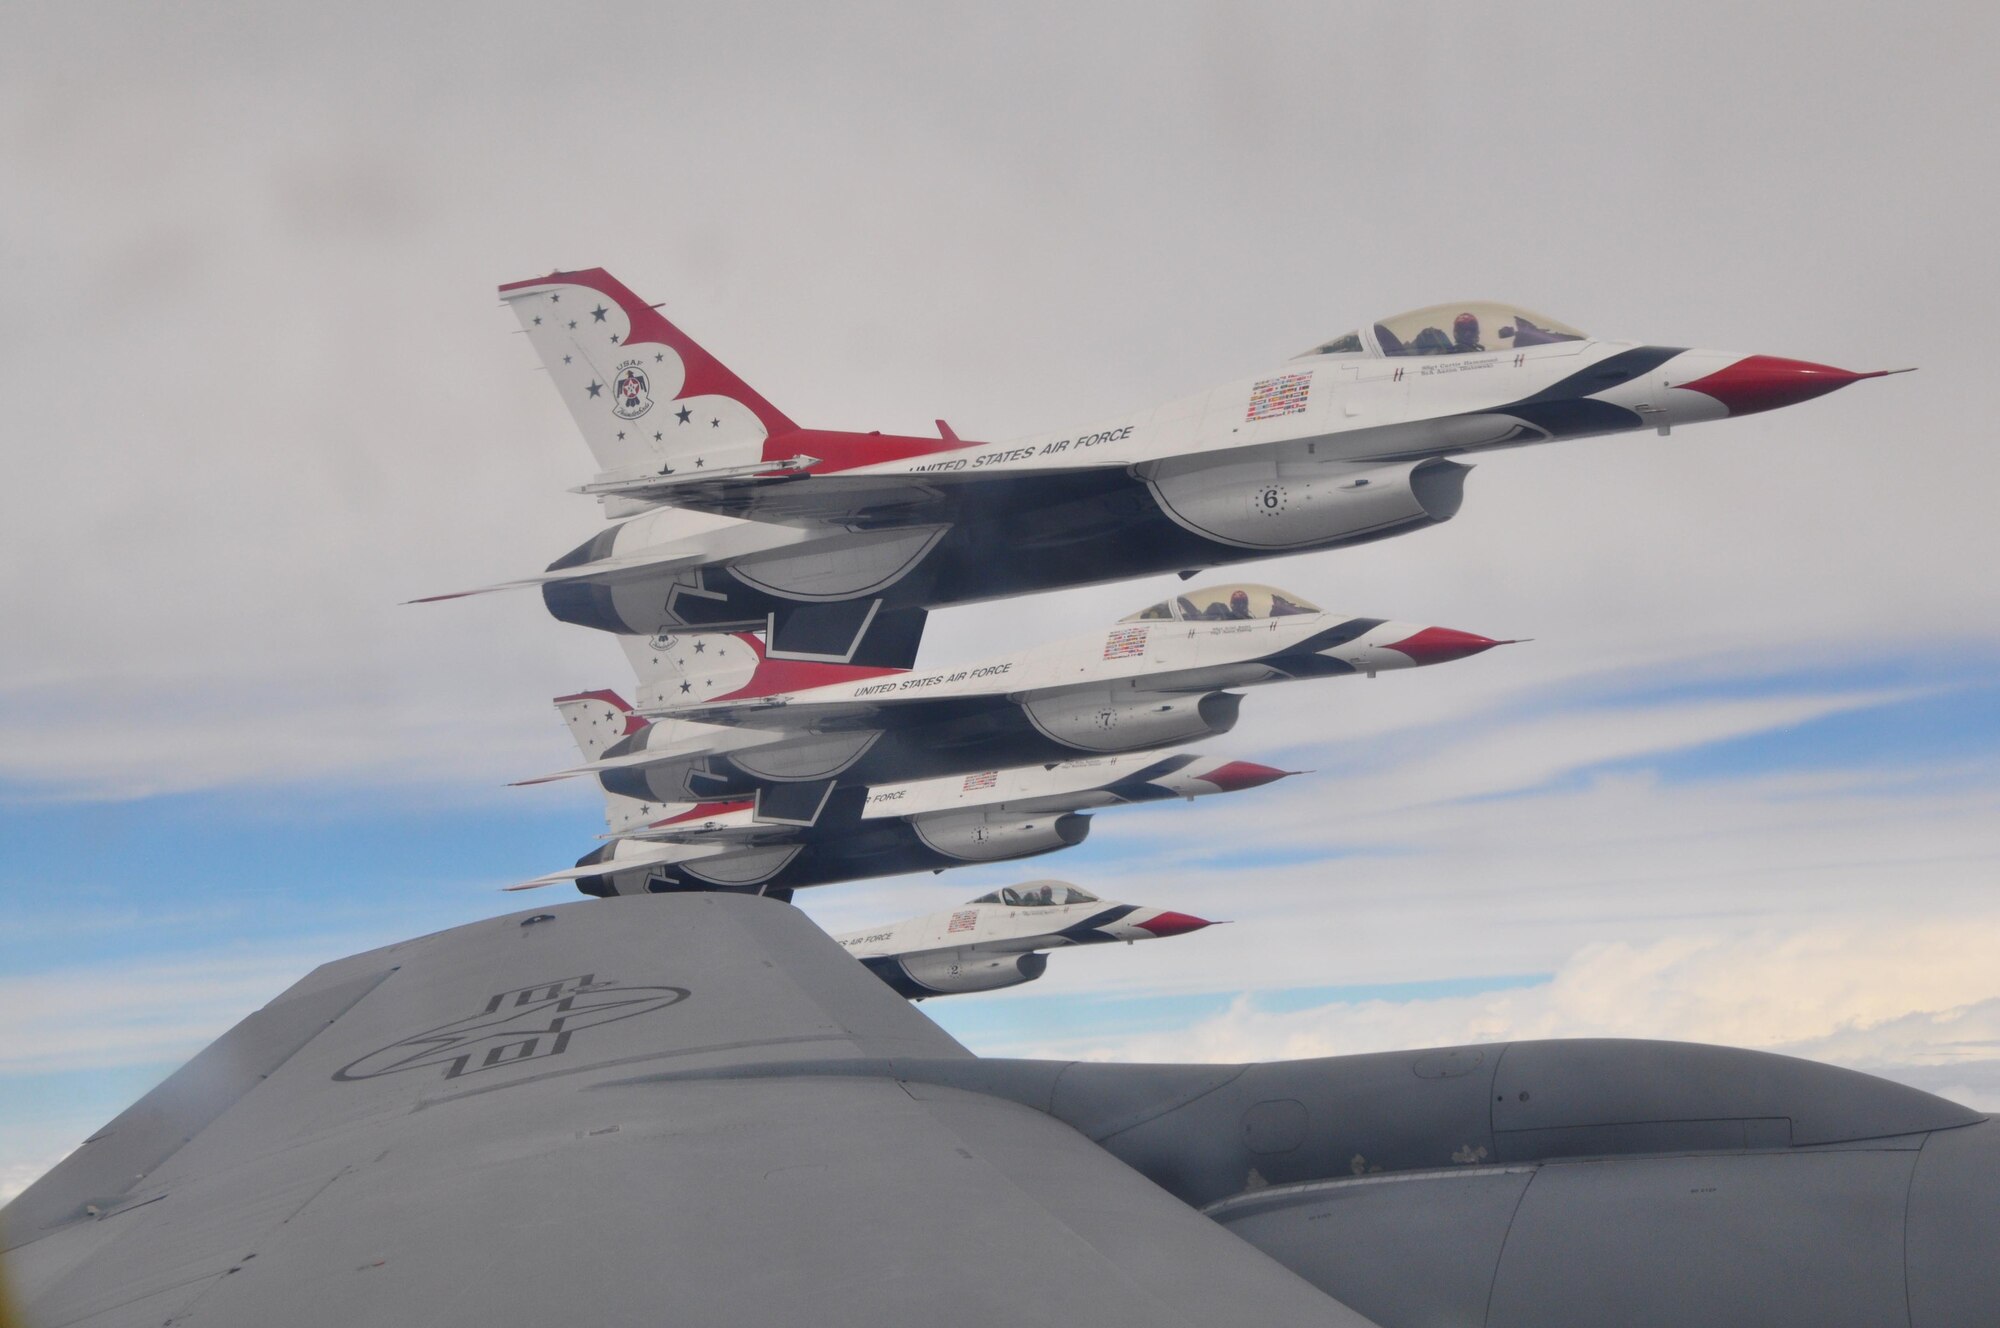 The U. S. Air Force Thunderbirds Air Demonstration Squadron, fly their F-16 Fighting Falcons in formation near the wing of a KC-135 Stratotanker from McConnell Air Force Base, Kan., Sept. 3, 2015.  The KC-135 provided cross-country air refueling support for the Thunderbirds.  This past season alone, the 931 ARG flew approximately 20 sorties with the team providing more than 700,000 gallons of fuel to help the team arrive on time to their scheduled shows.  (U.S. Air Force photo by Tech. Sgt. Abigail Klein)